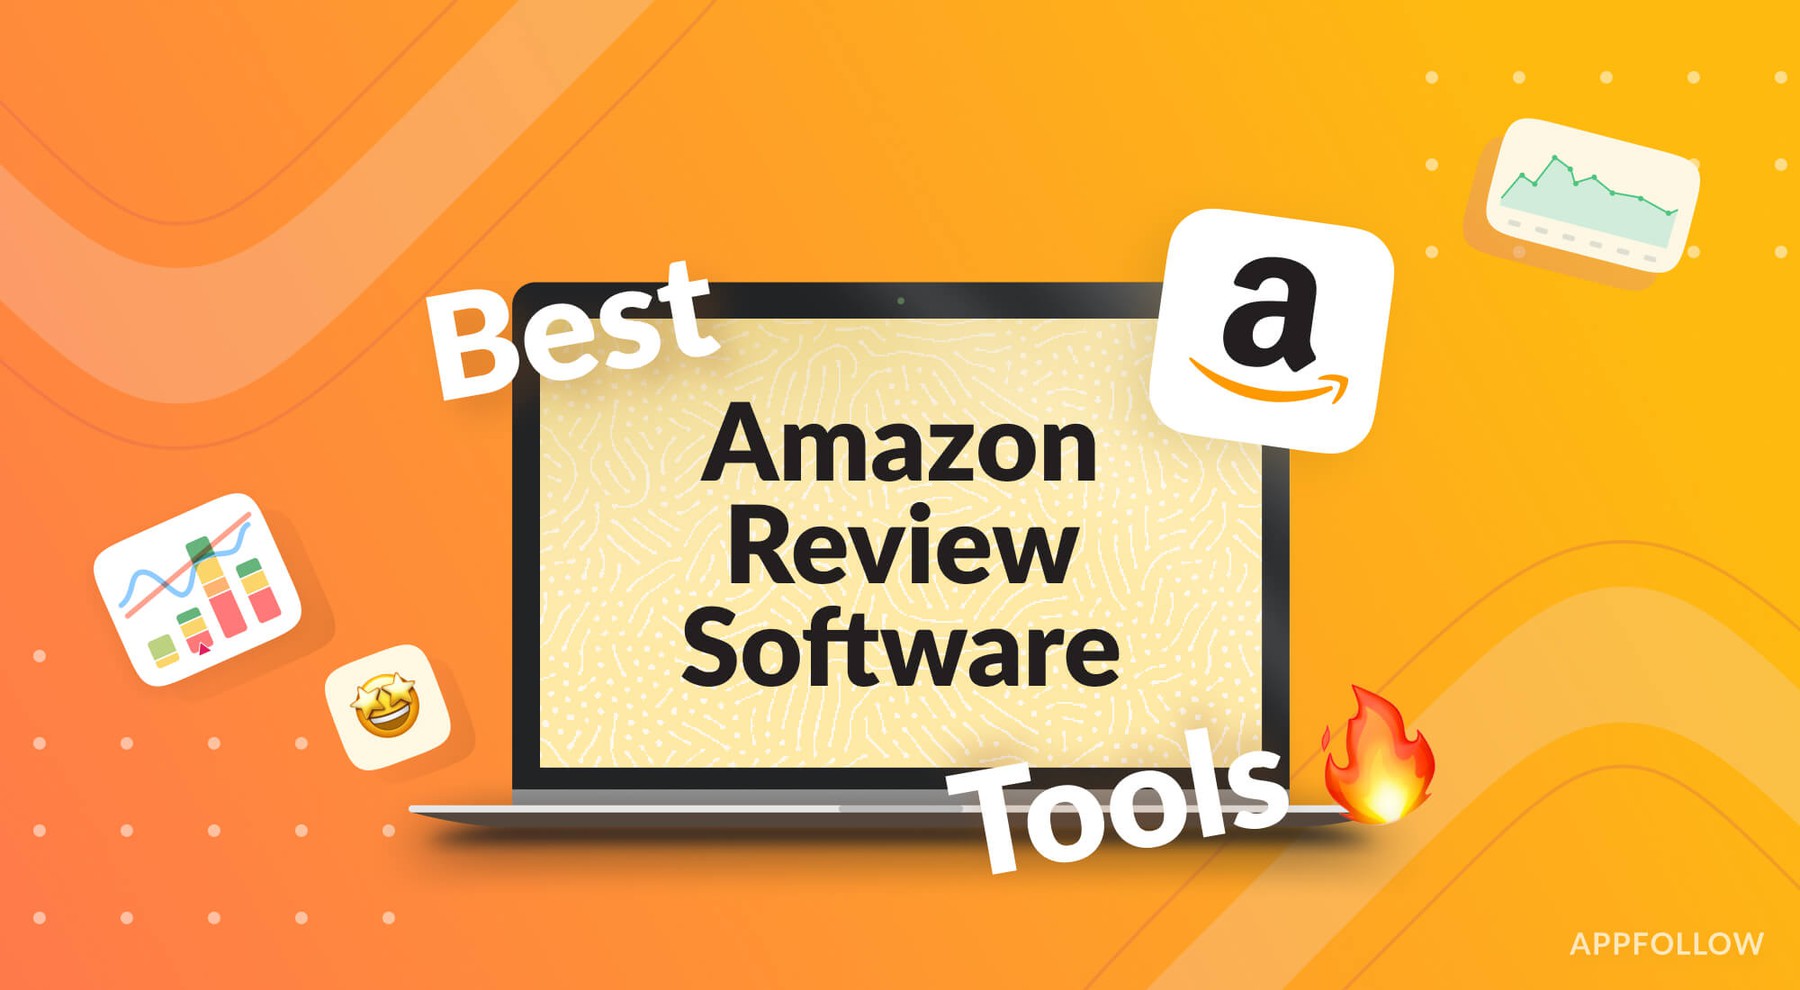 Review Tools on Amazon